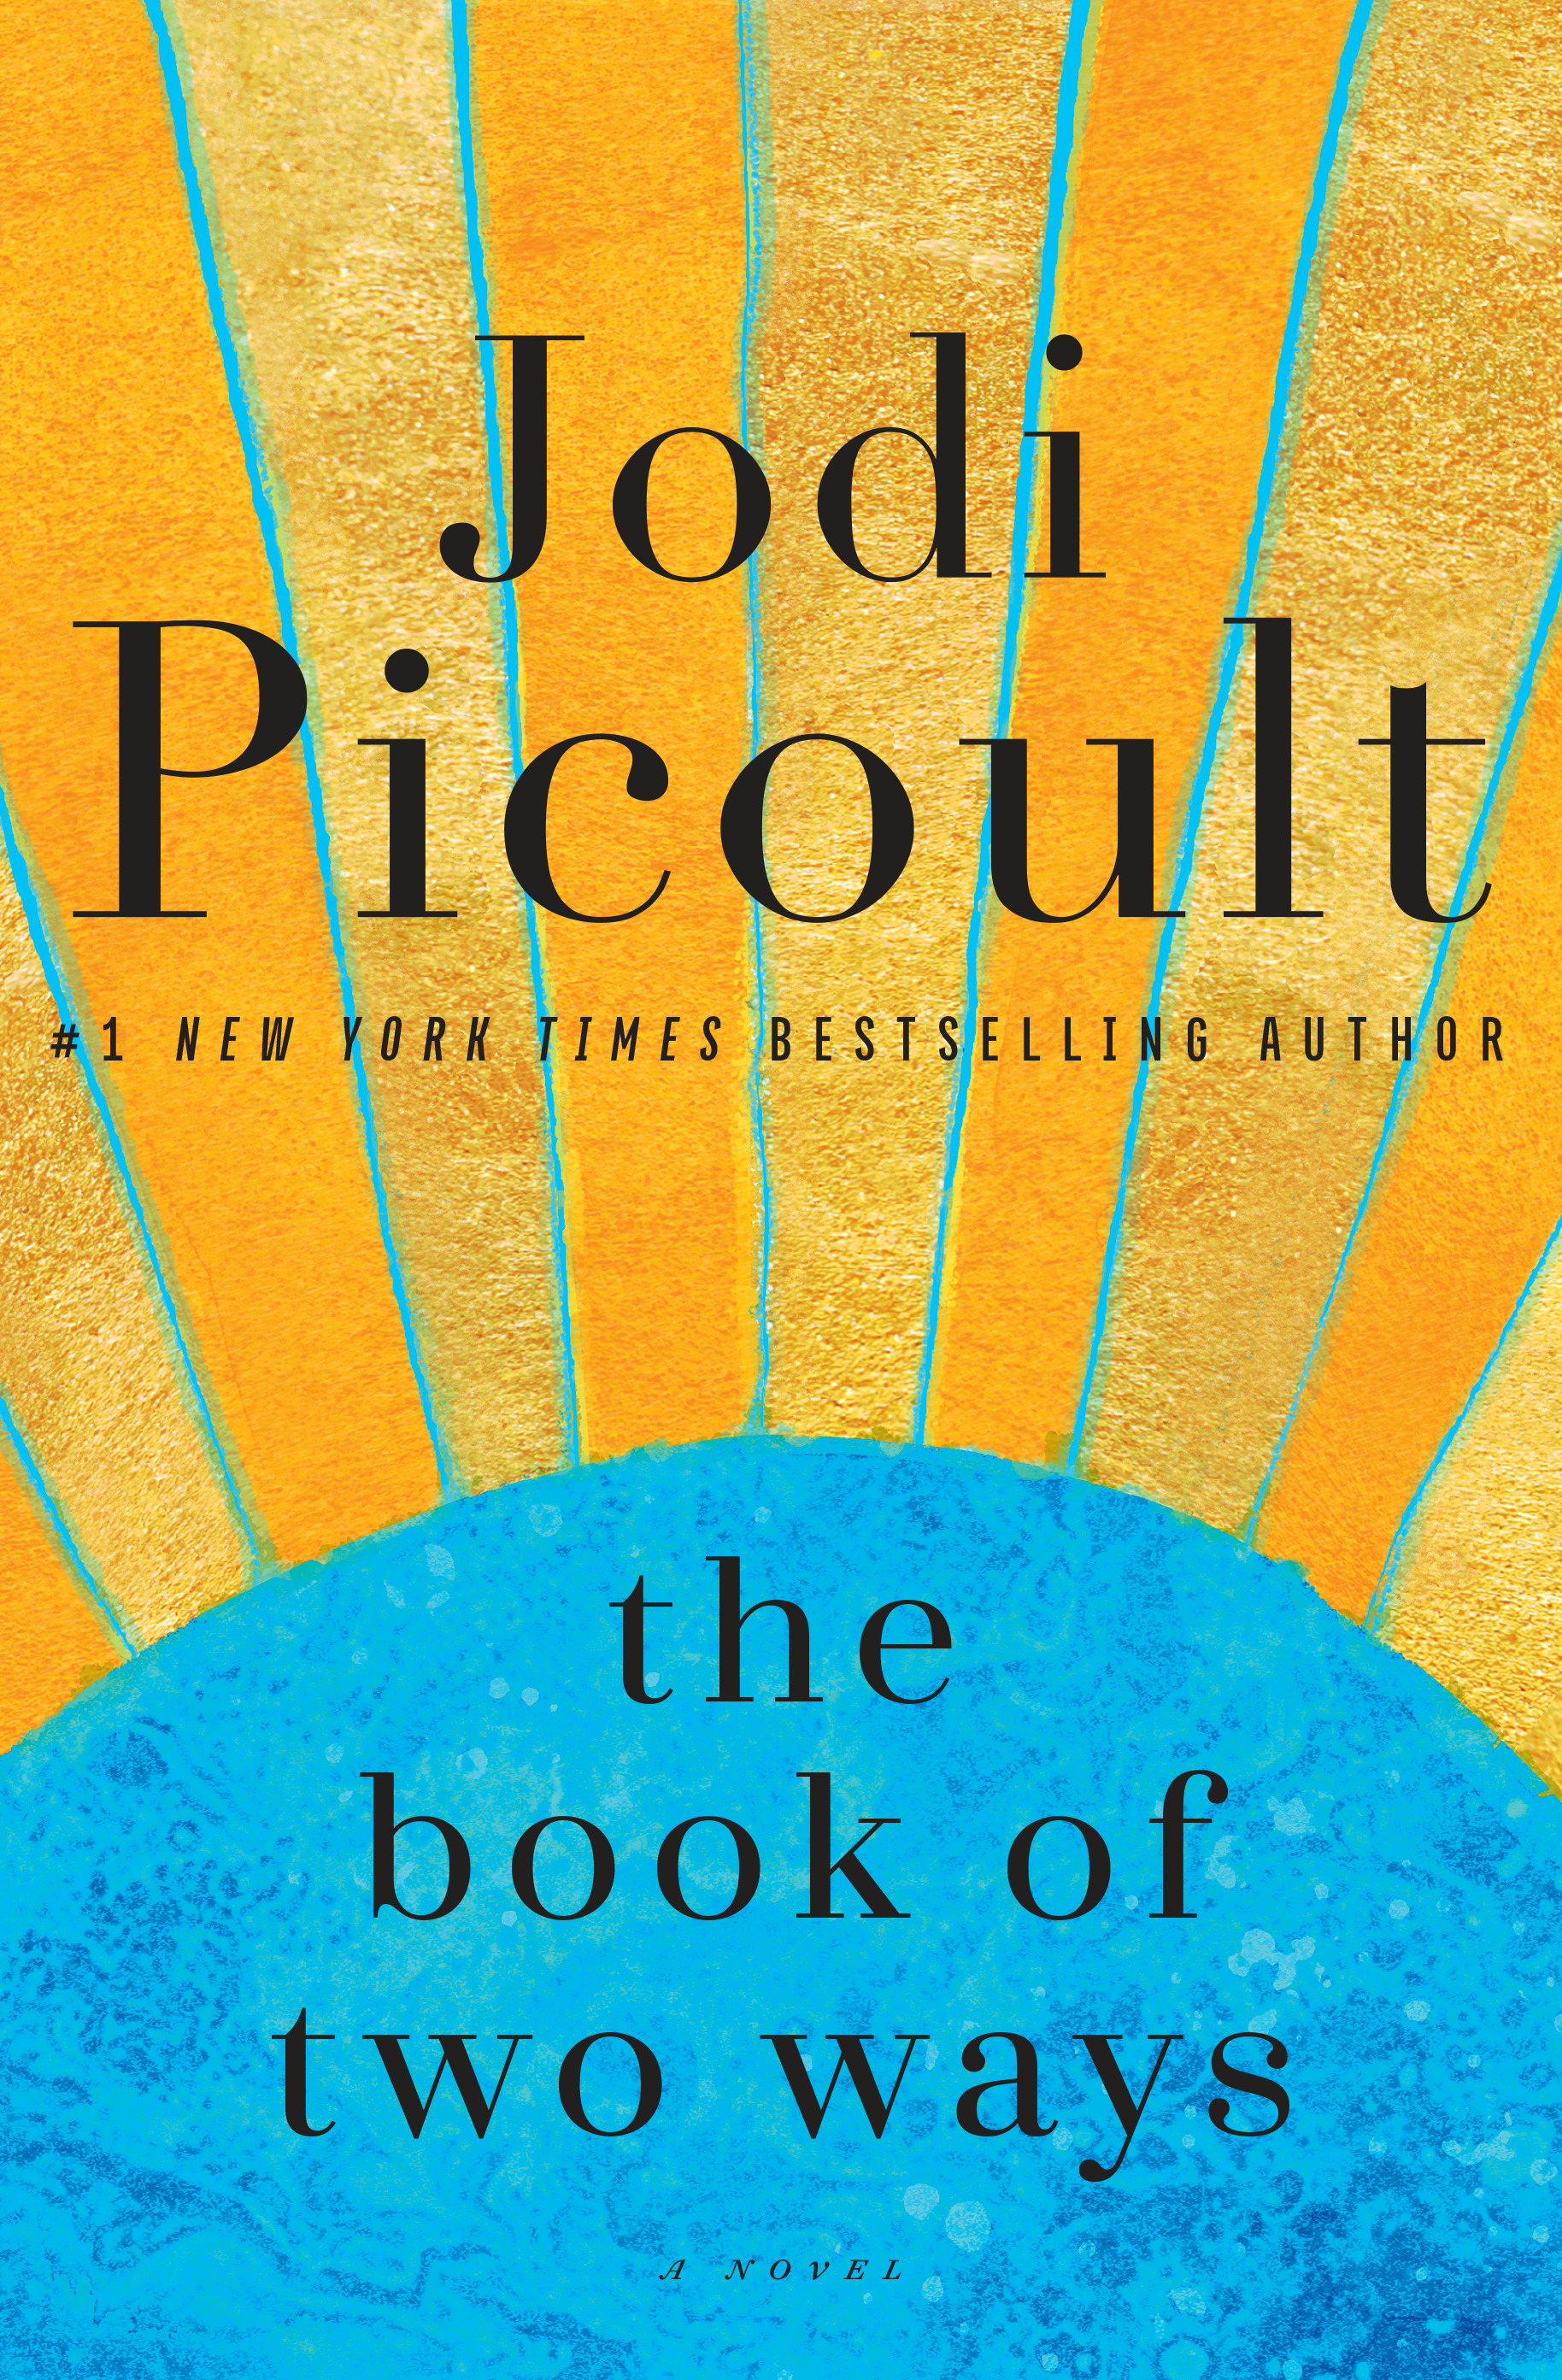 [EPUB] The Book of Two Ways by Jodi Picoult